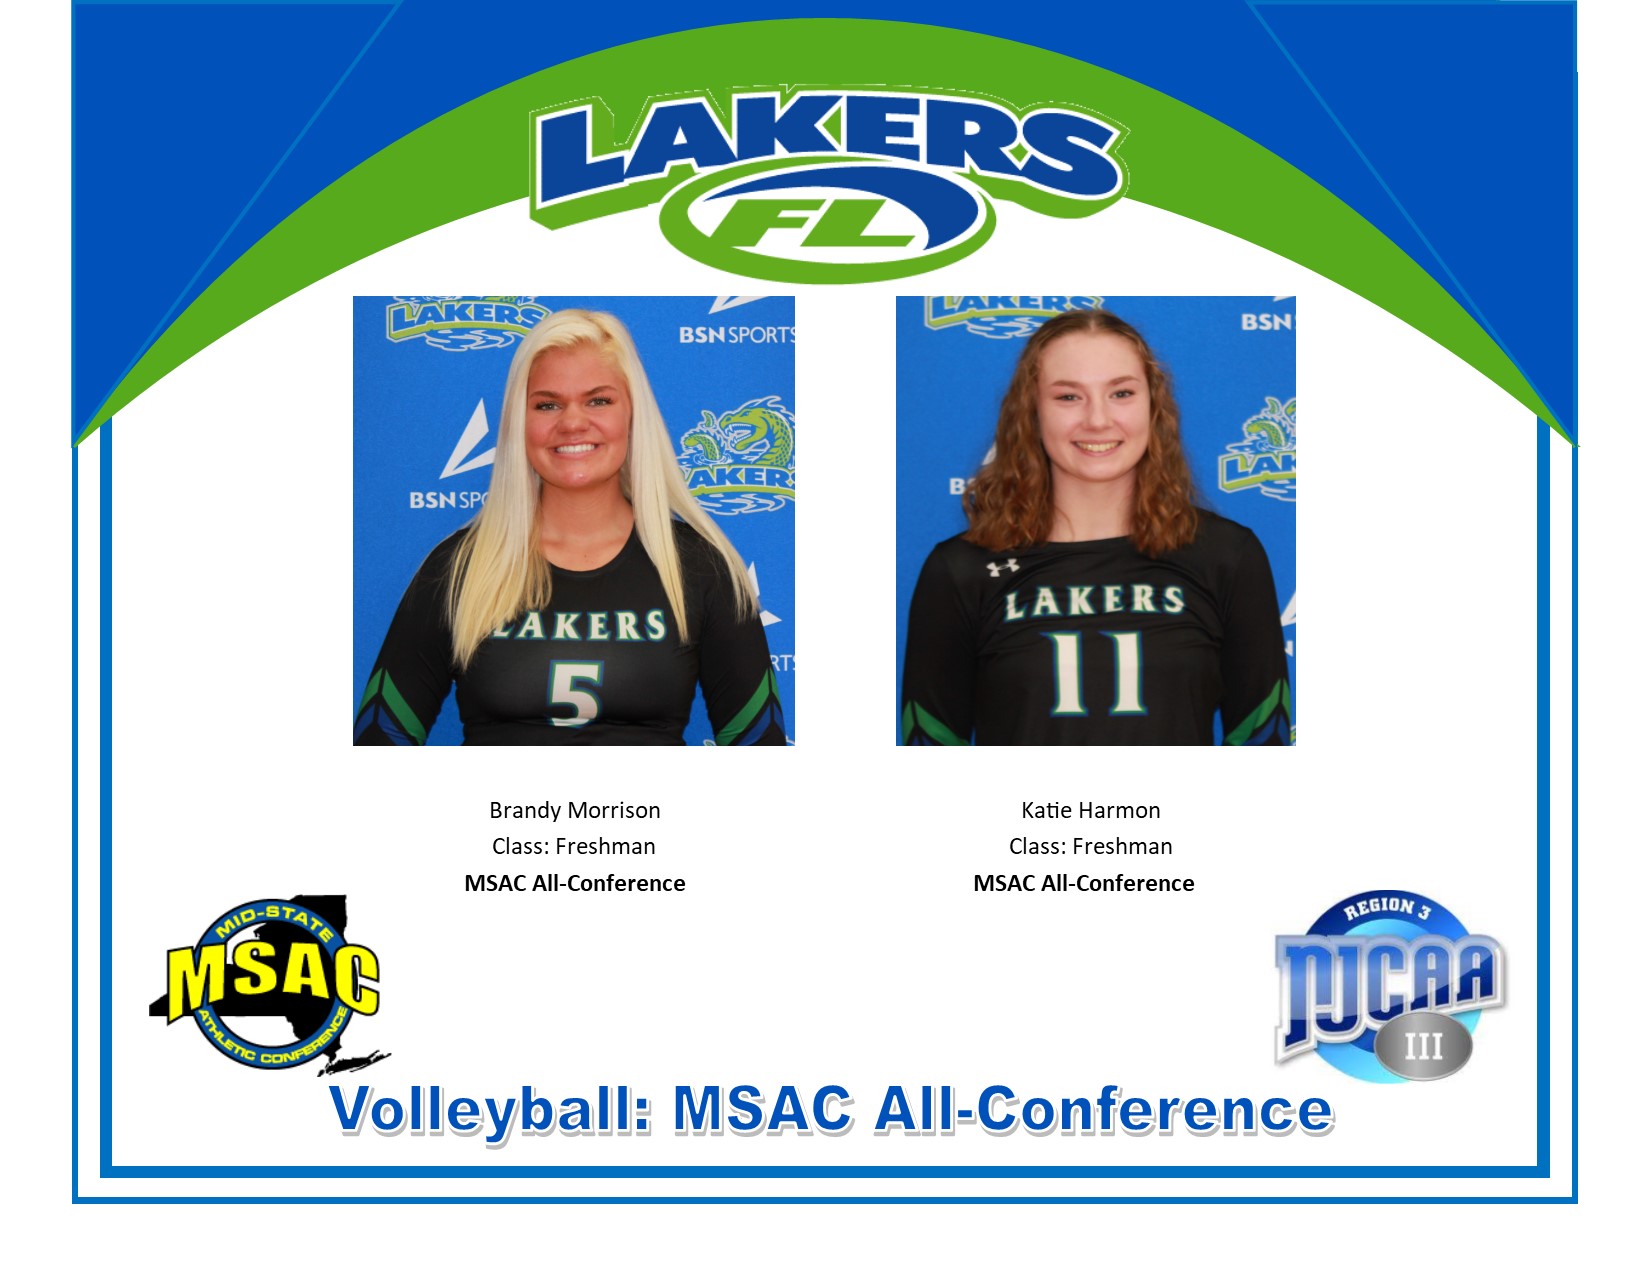 Two Lakers Named to the 2019 MSAC Volleyball All-Conference Team